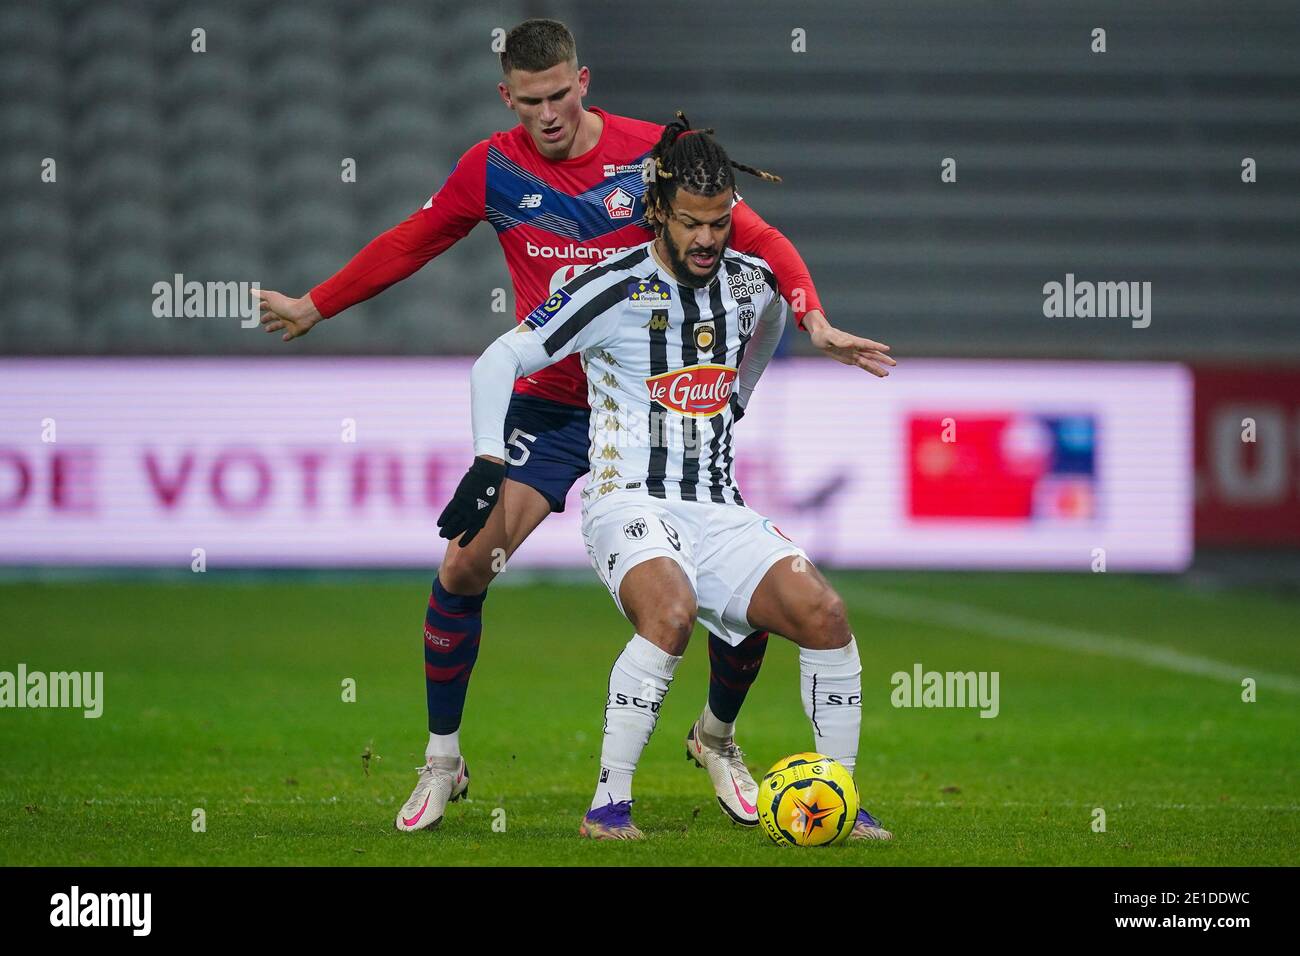 LILLE, FRANCE - JANUARY 6: Lois Diony of Angers SCO, Sven Botman of Lille OSC during the Ligue 1 match between Lille OSC and Angers SCO at Stade Pierre Mauroy on January 6, 2021 in Lille, France (Photo by Jeroen Meuwsen/BSR Agency/Alamy Live News)*** Local Caption *** Lois Diony, Sven Botman Stock Photo